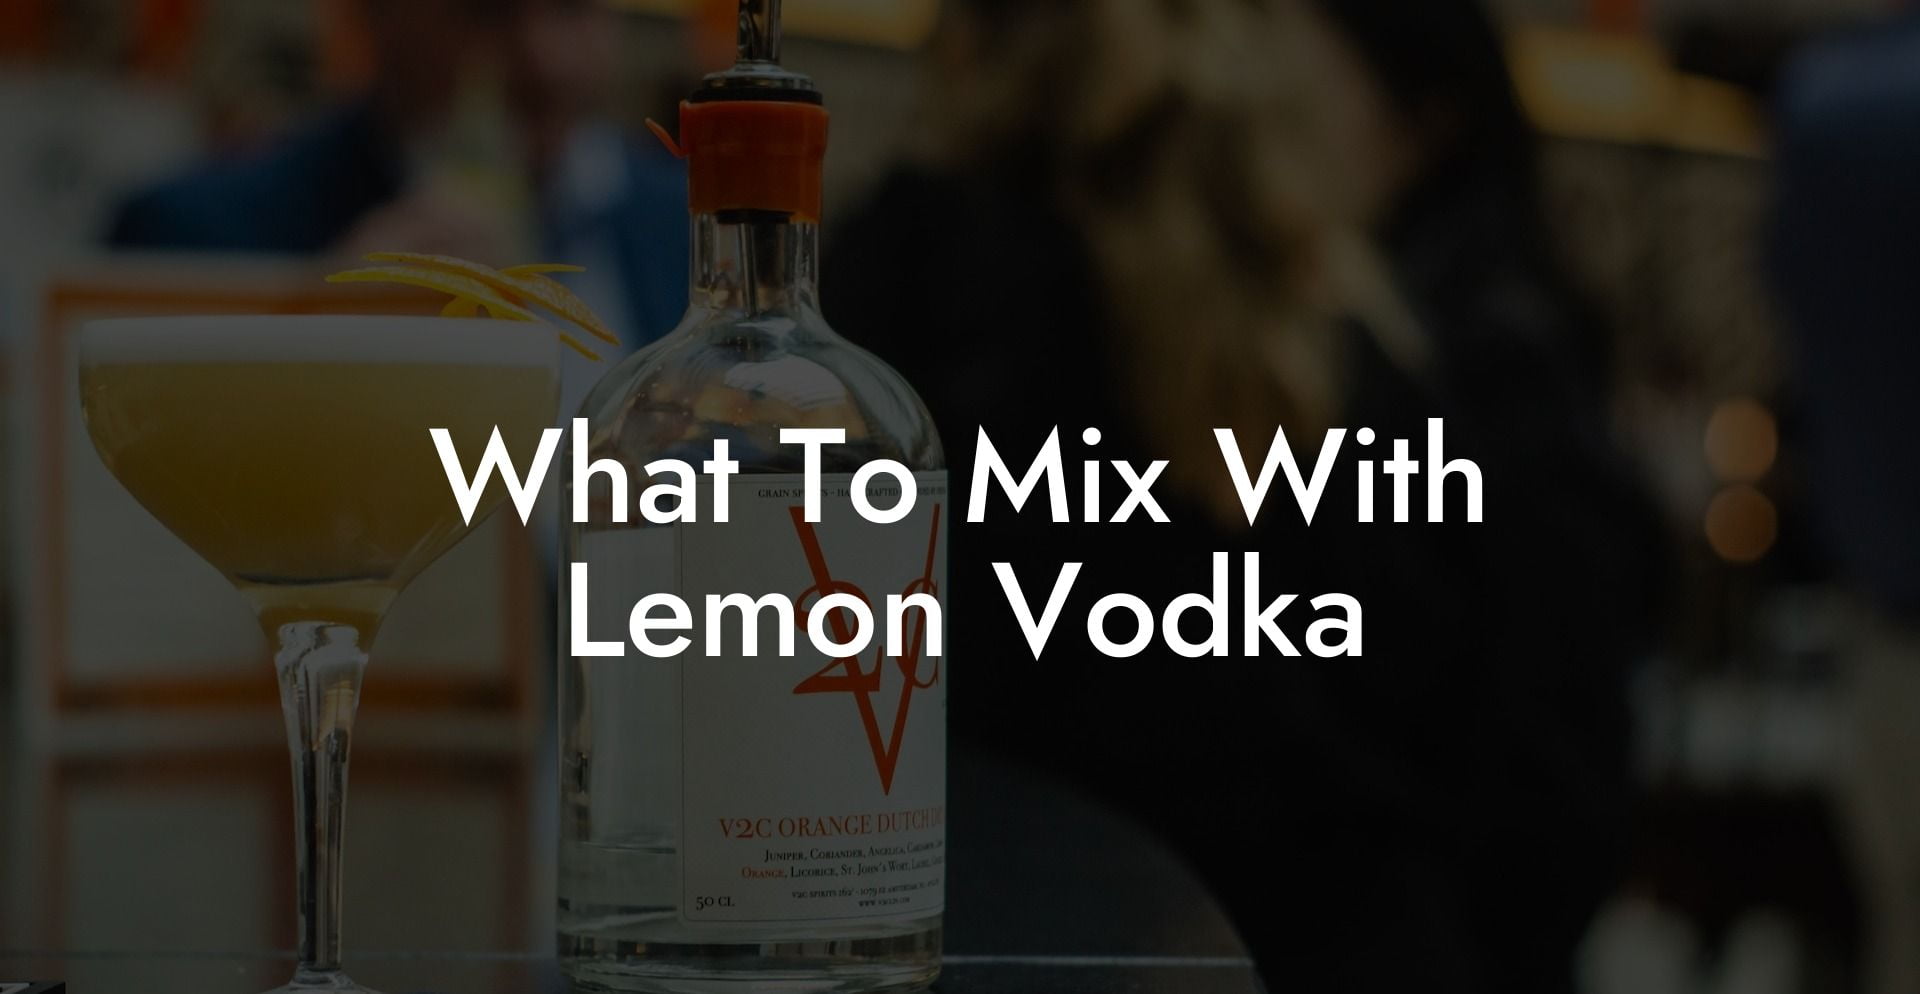 What To Mix With Lemon Vodka